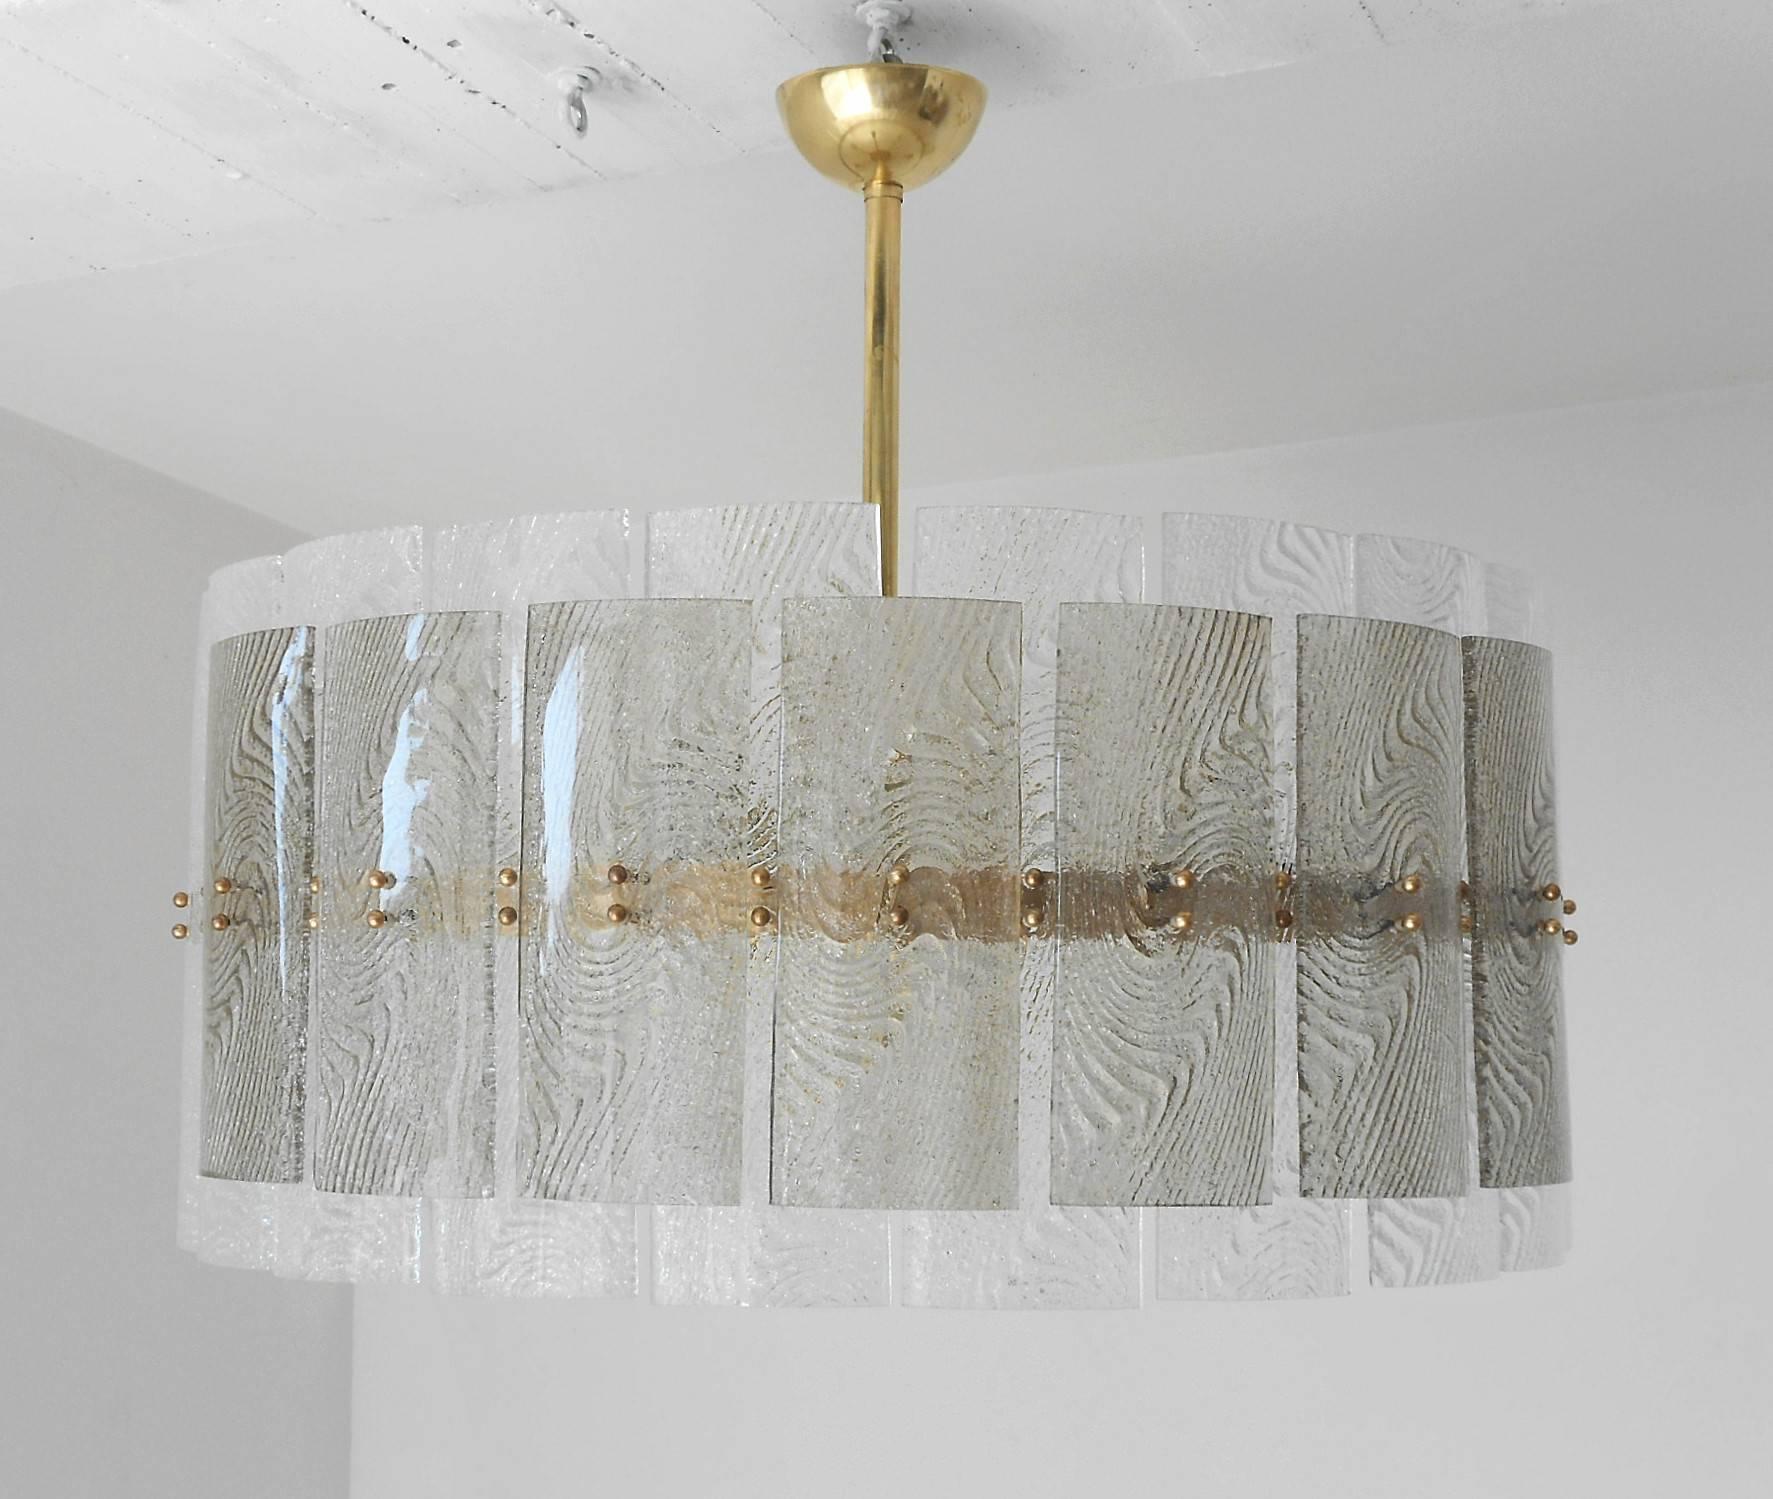 Drum shape chandelier with textured clear and smoky Murano glass tiles mounted on brass structure. Frosted glass diffuser.

Six standard base light sockets/wired for the US.